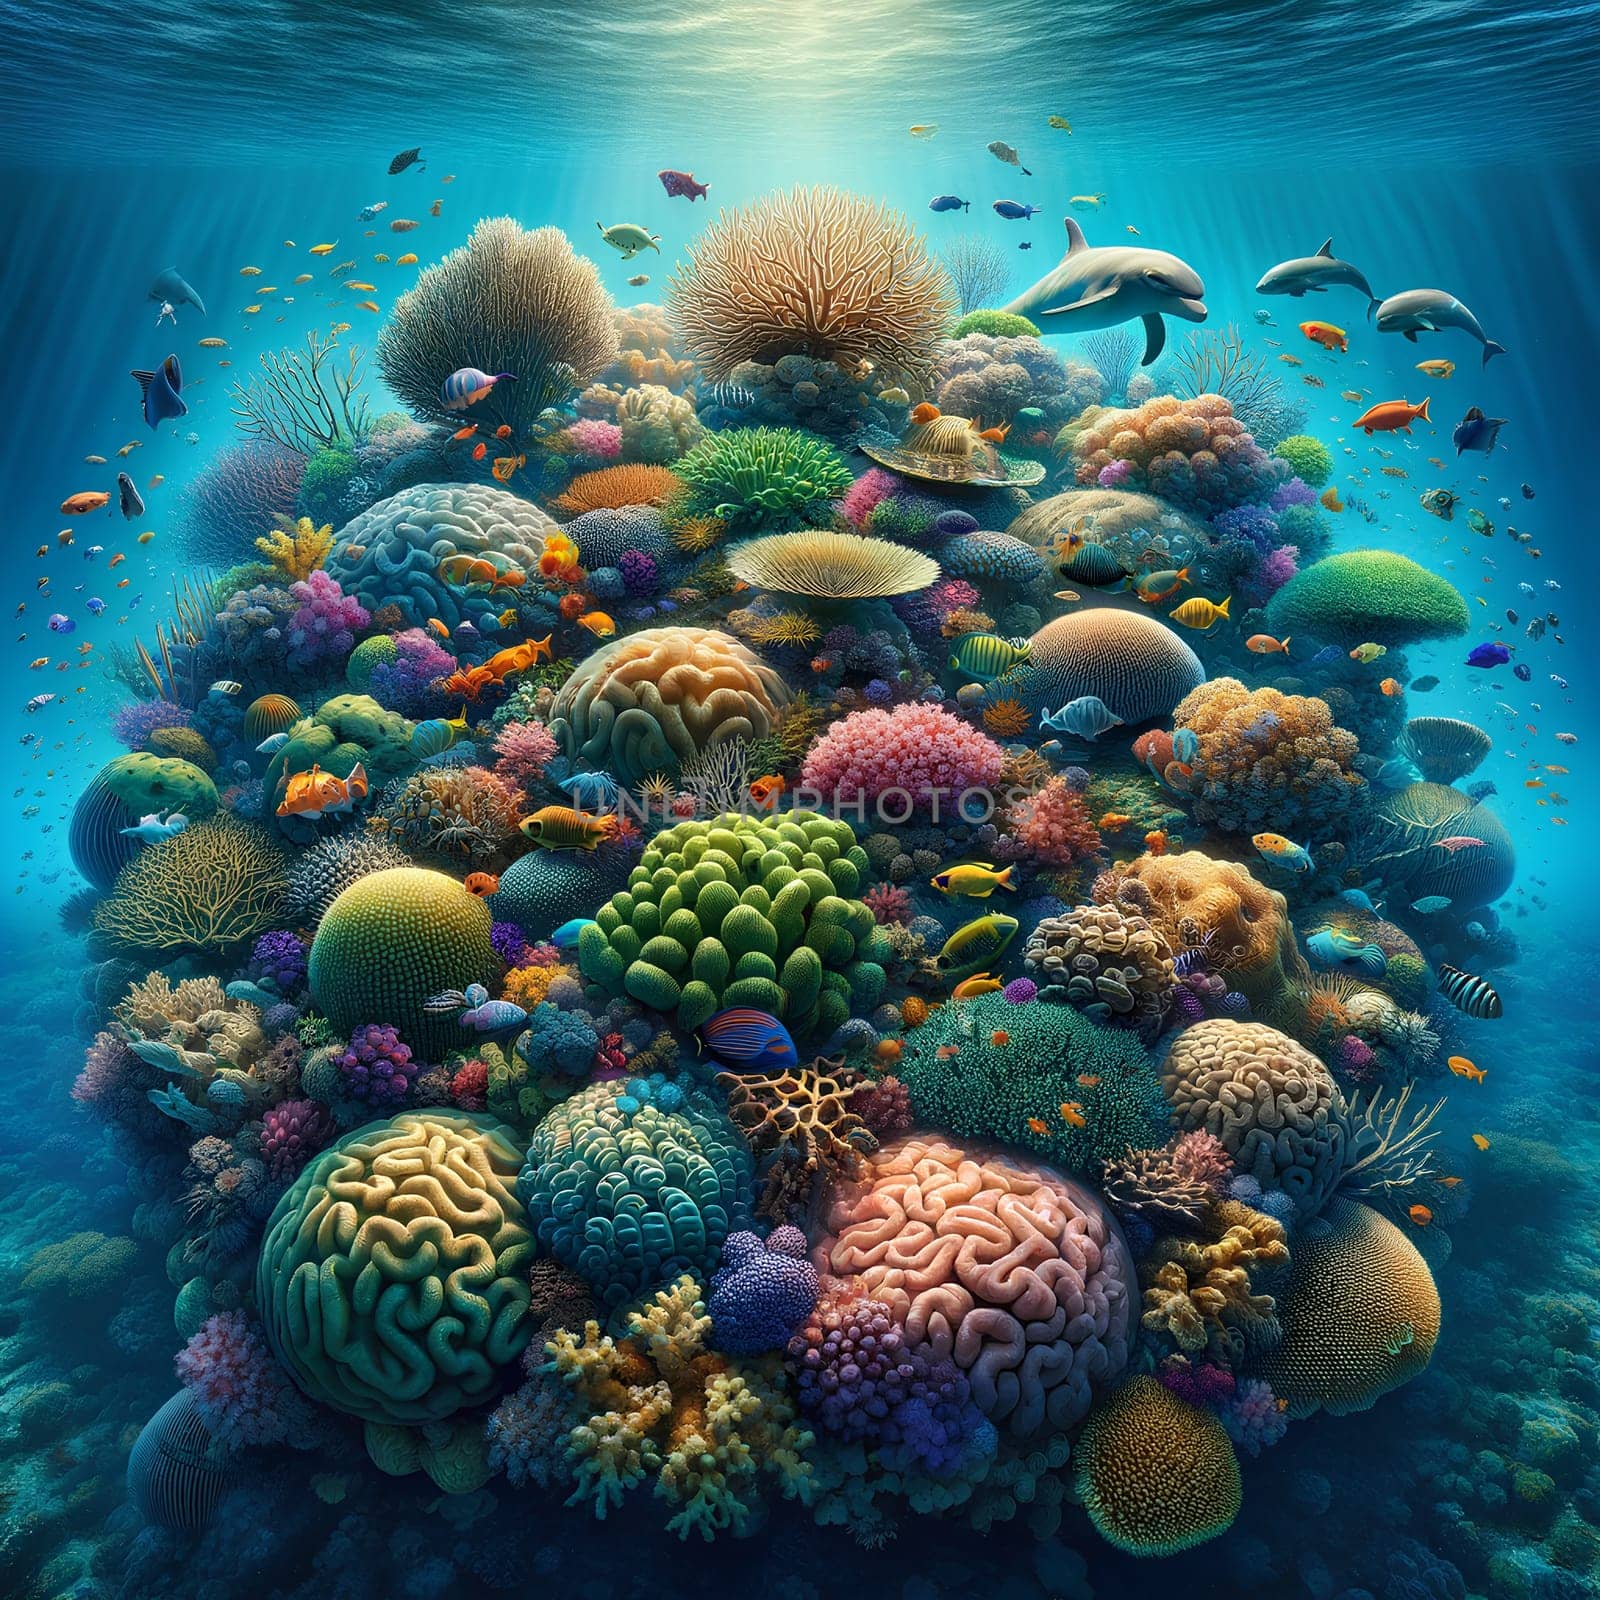 Immerse yourself in the mesmerizing beauty of a lively coral reef, where a kaleidoscope of colors unfolds beneath the sunlit waves. From intricate corals to playful fish, this image captures the essence of an underwater paradise